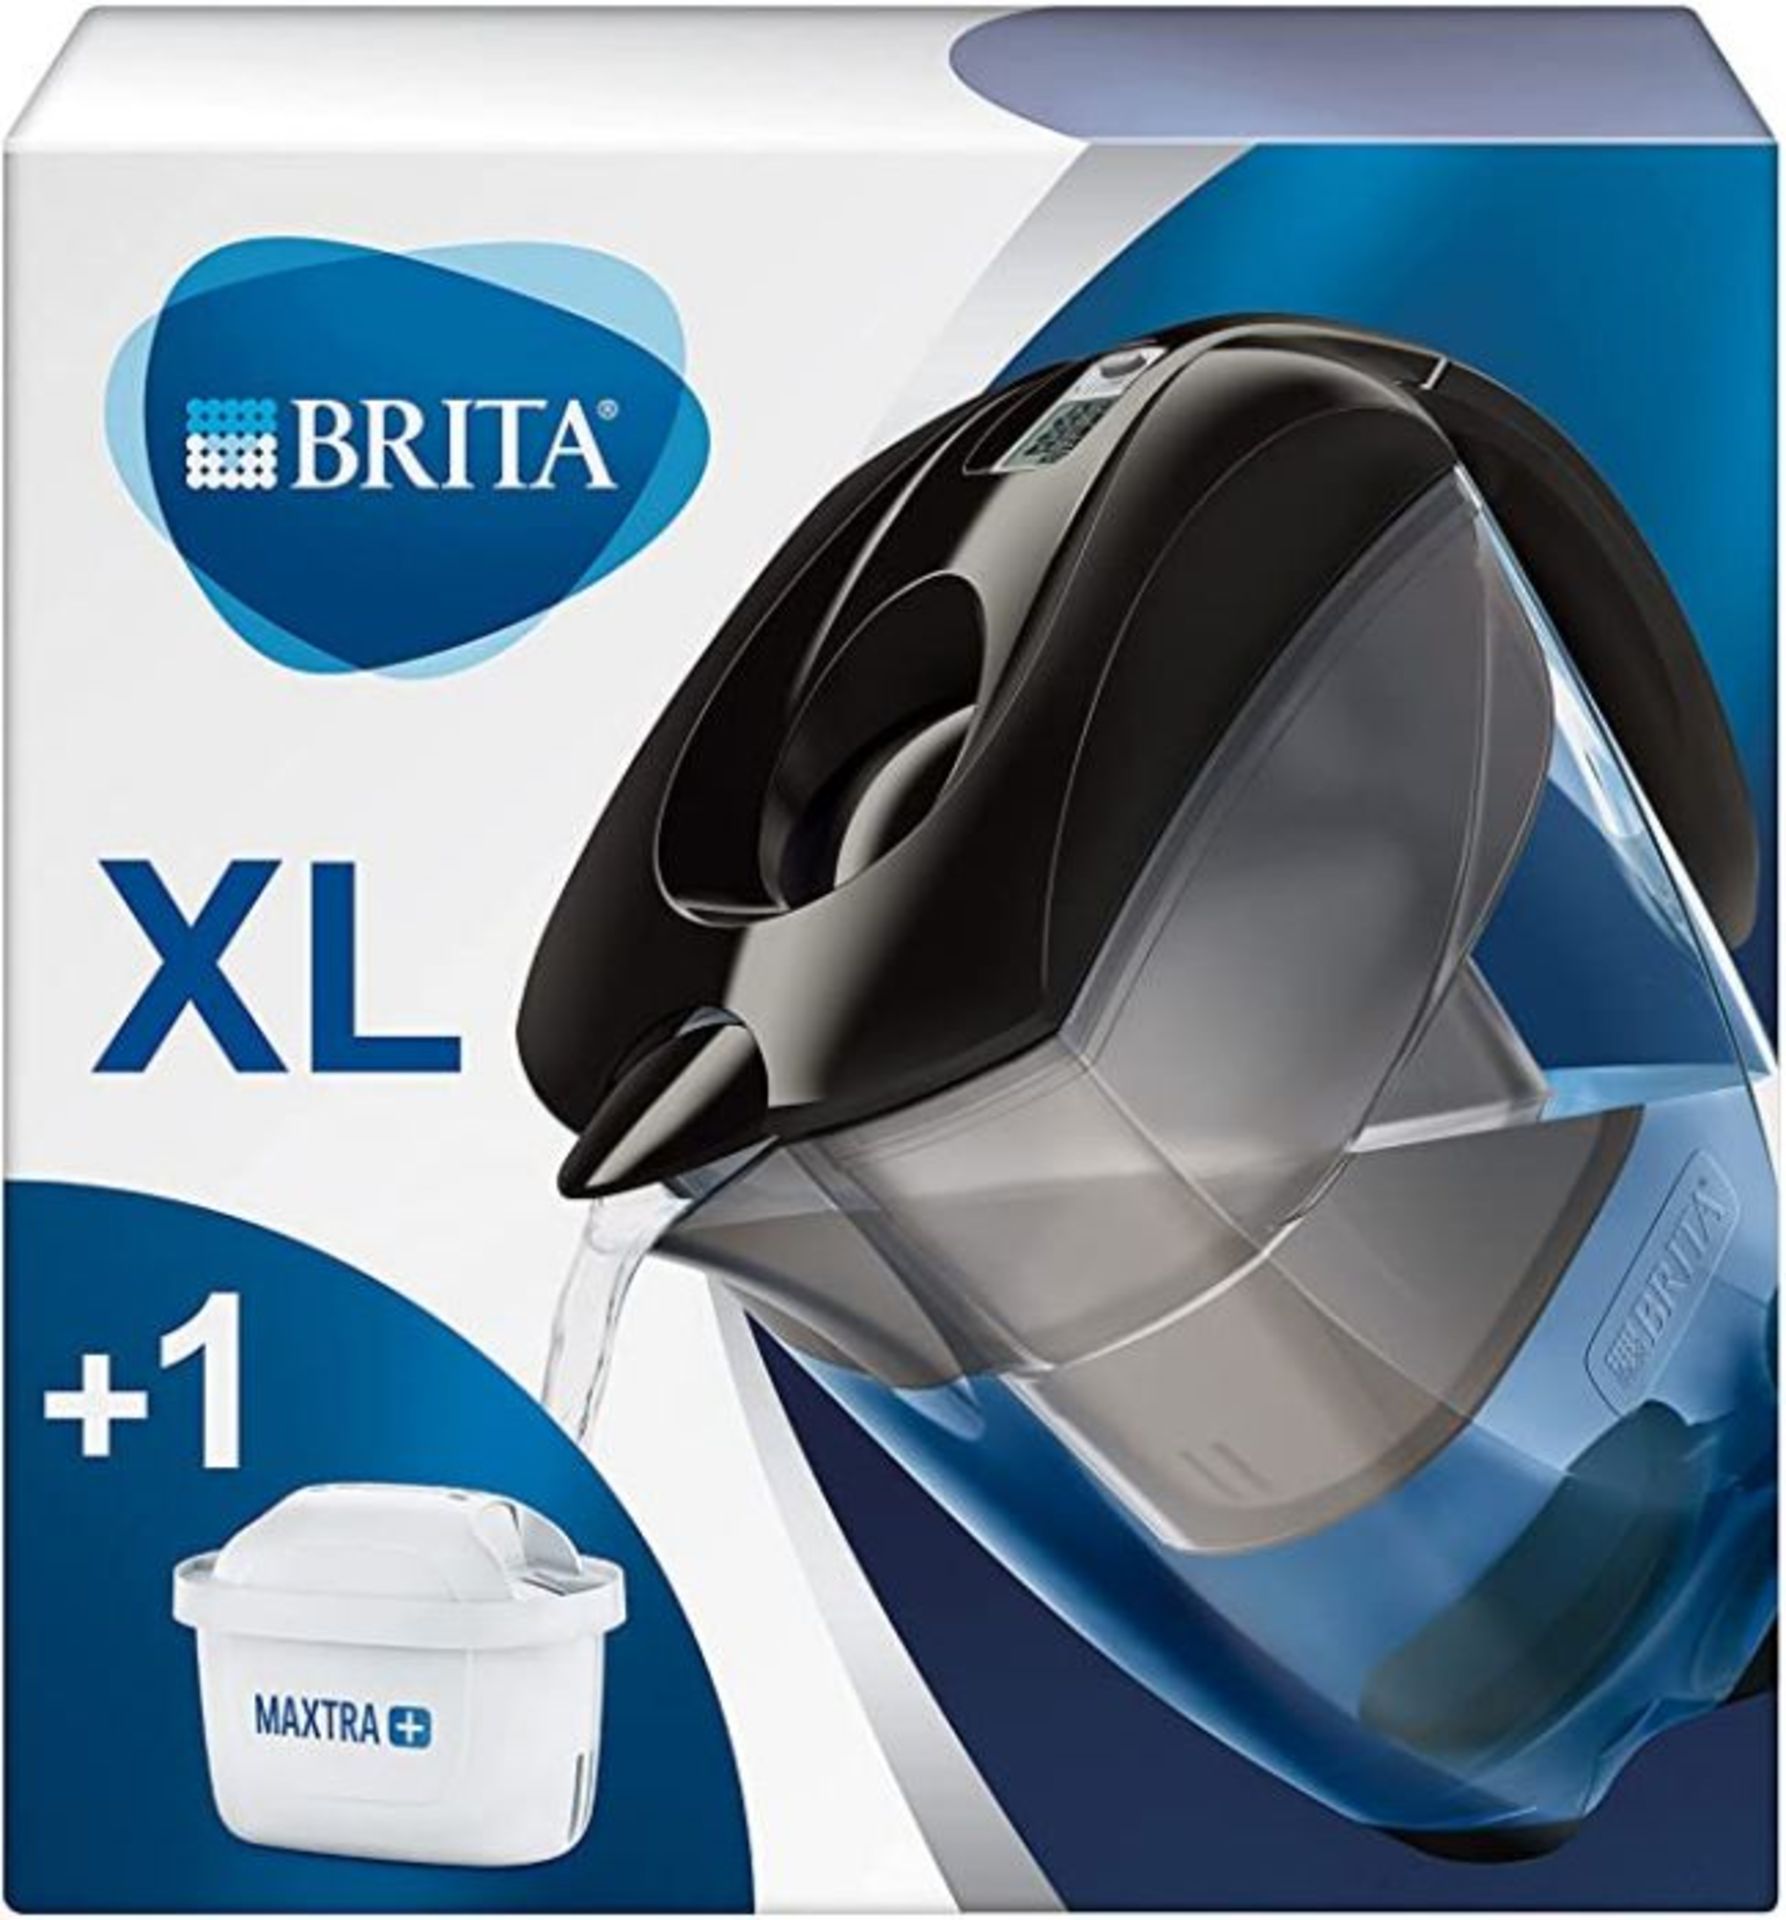 BRITA Elemaris XL water filter jug for reduction of chlorine, limescale and impurities, Includes 1 x - Image 2 of 2